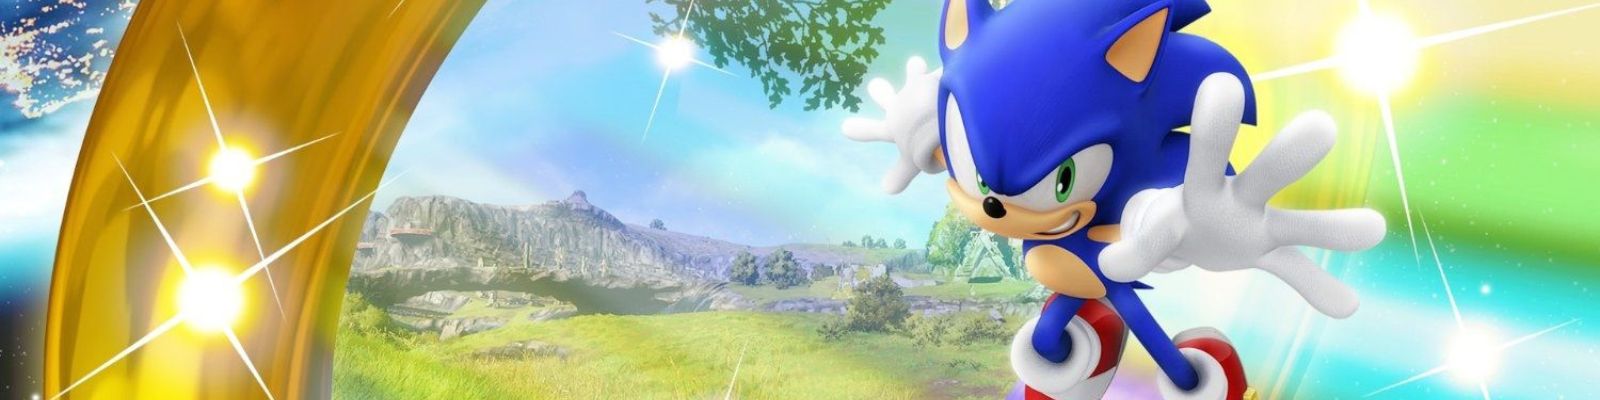 The Game Awards Fan Vote Has Genshin Impact and Sonic Frontiers